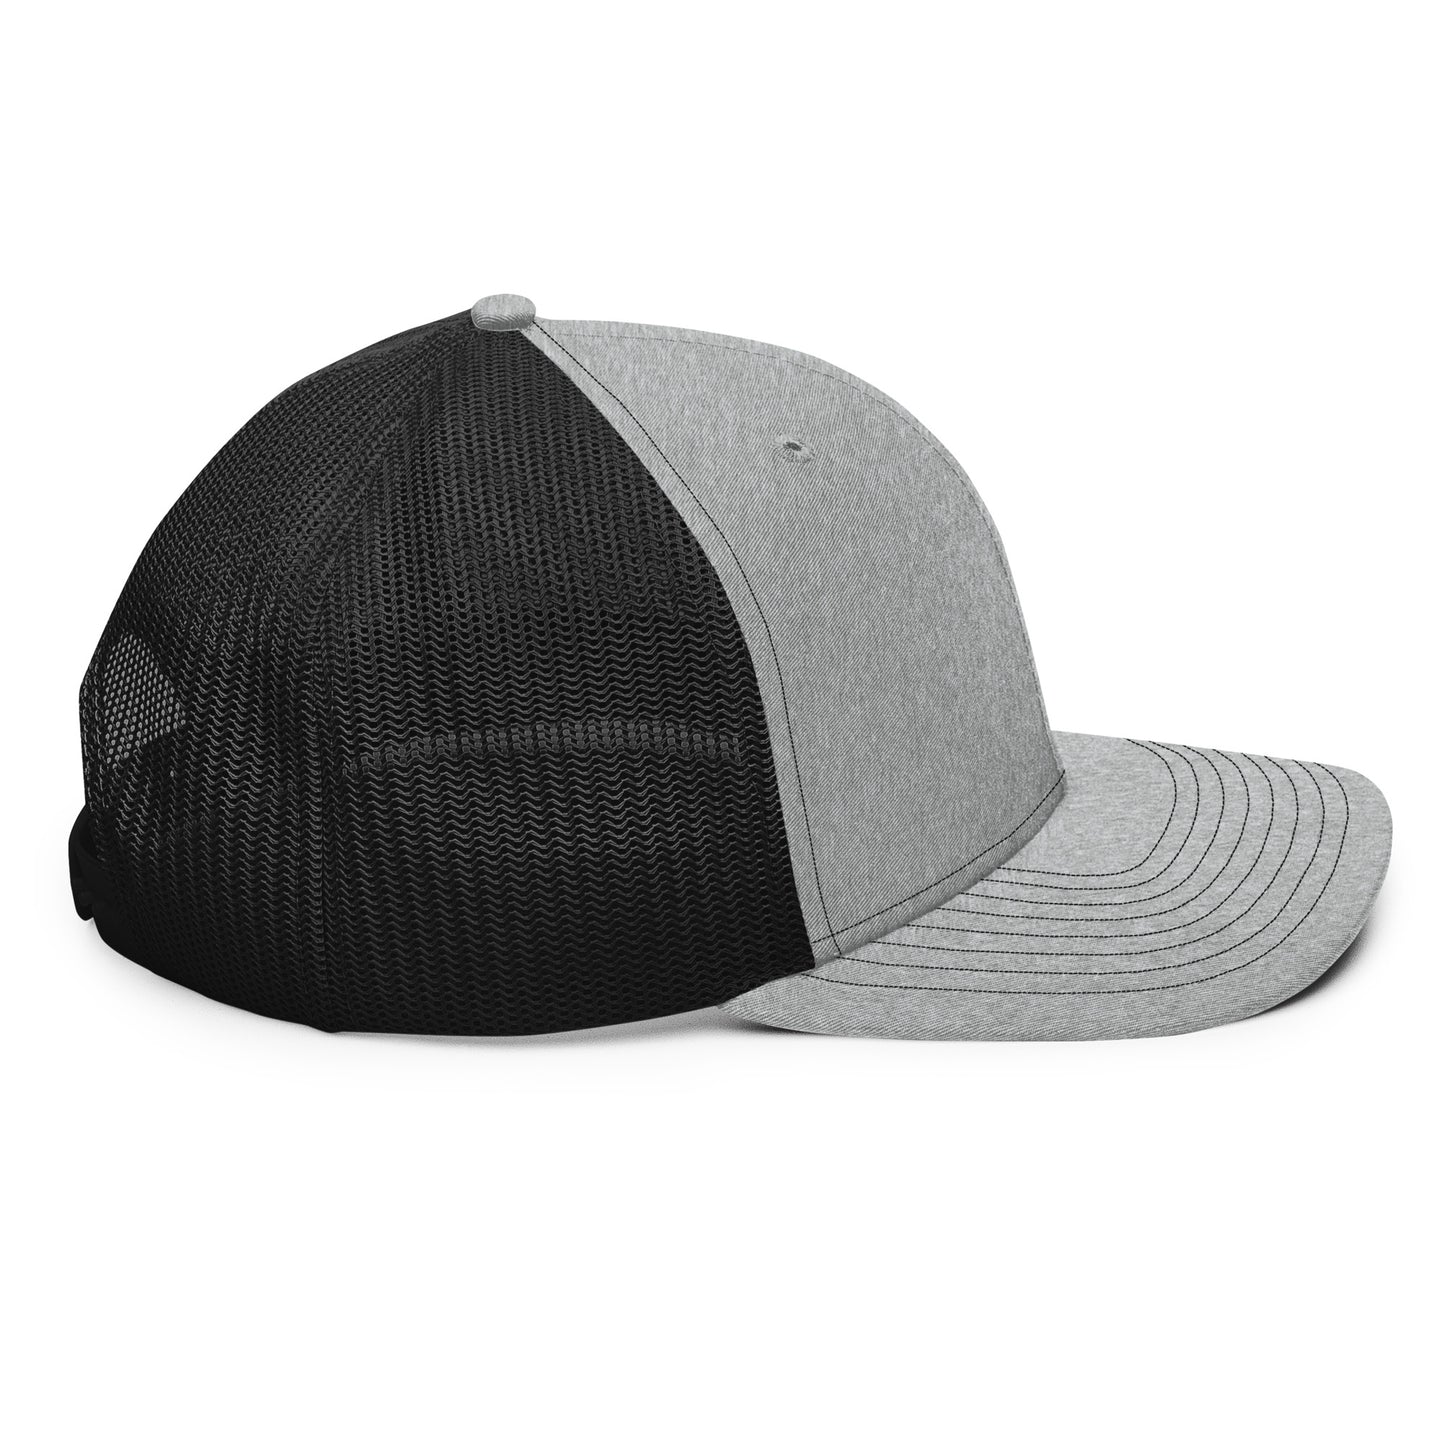 a black and grey hat on a white background